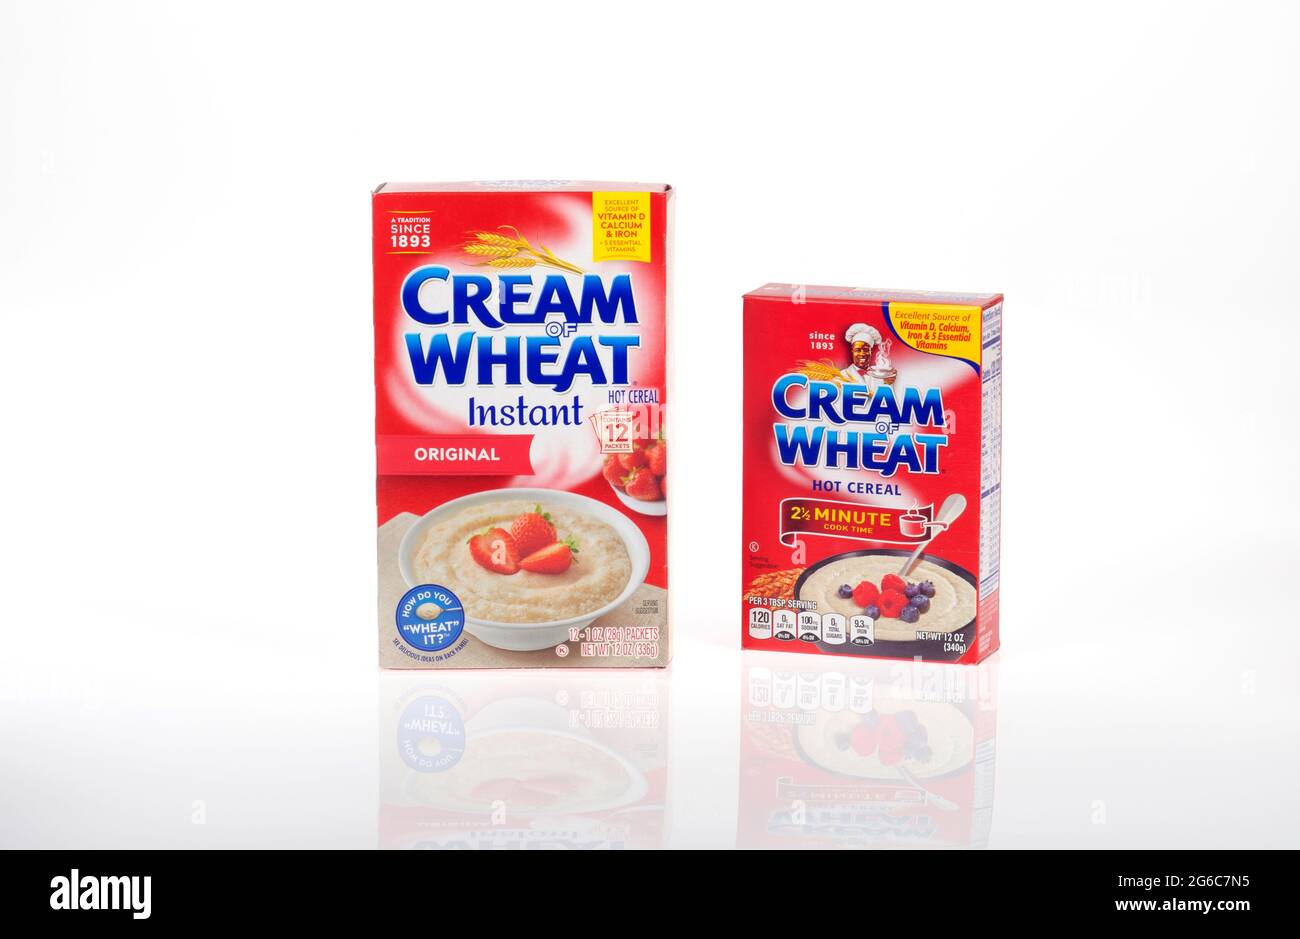 Cream of Wheat, Original Instant Hot Cereal Packets, 12 oz Box (Pack of 3)  with By The Cup Cereal Bowl